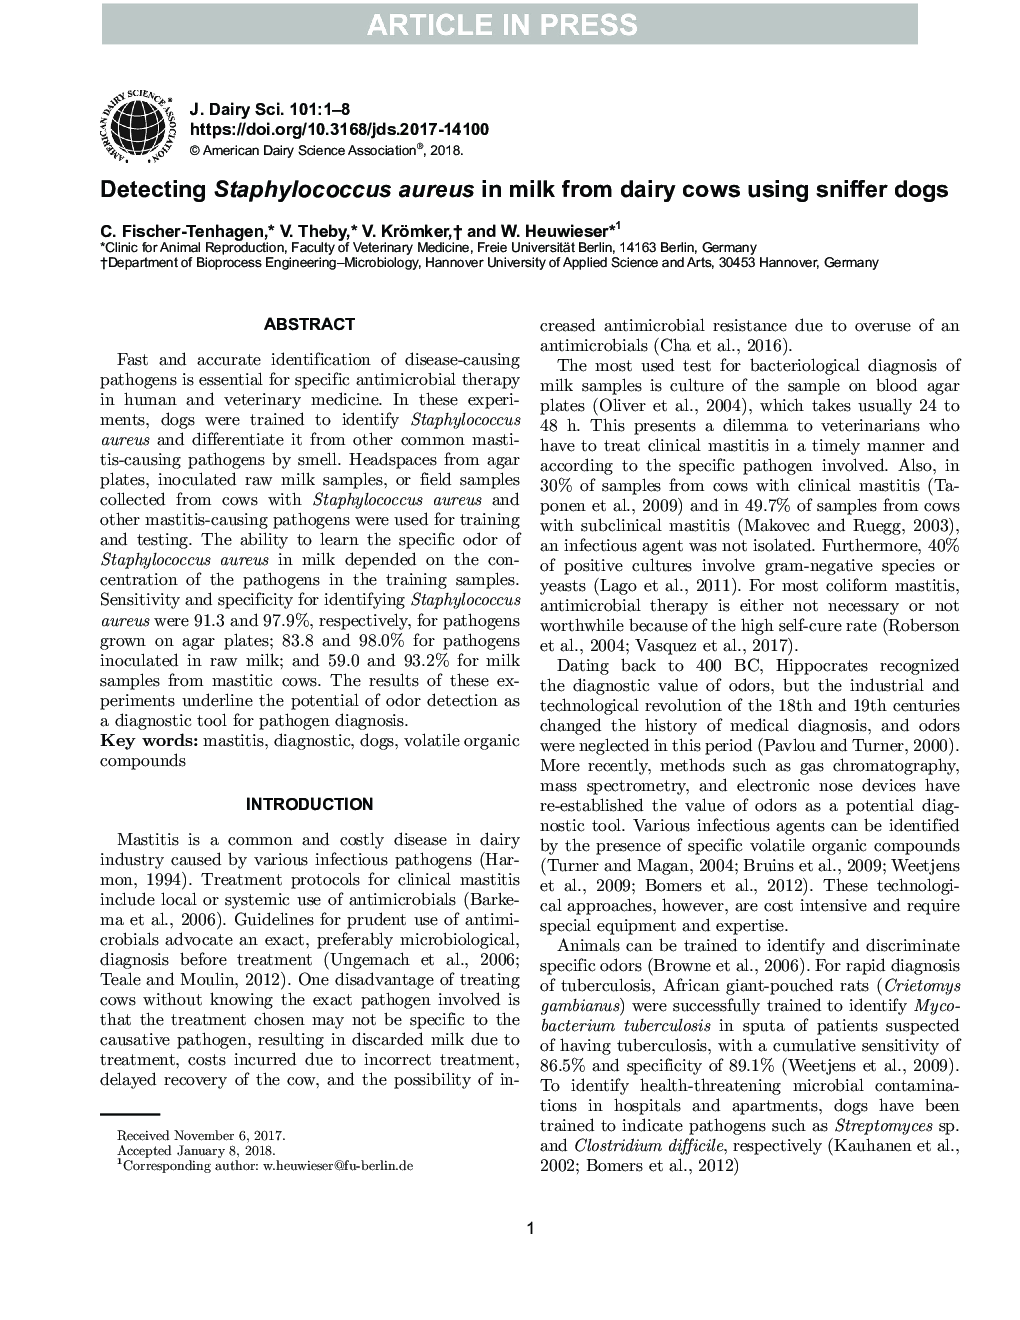 Detecting Staphylococcus aureus in milk from dairy cows using sniffer dogs